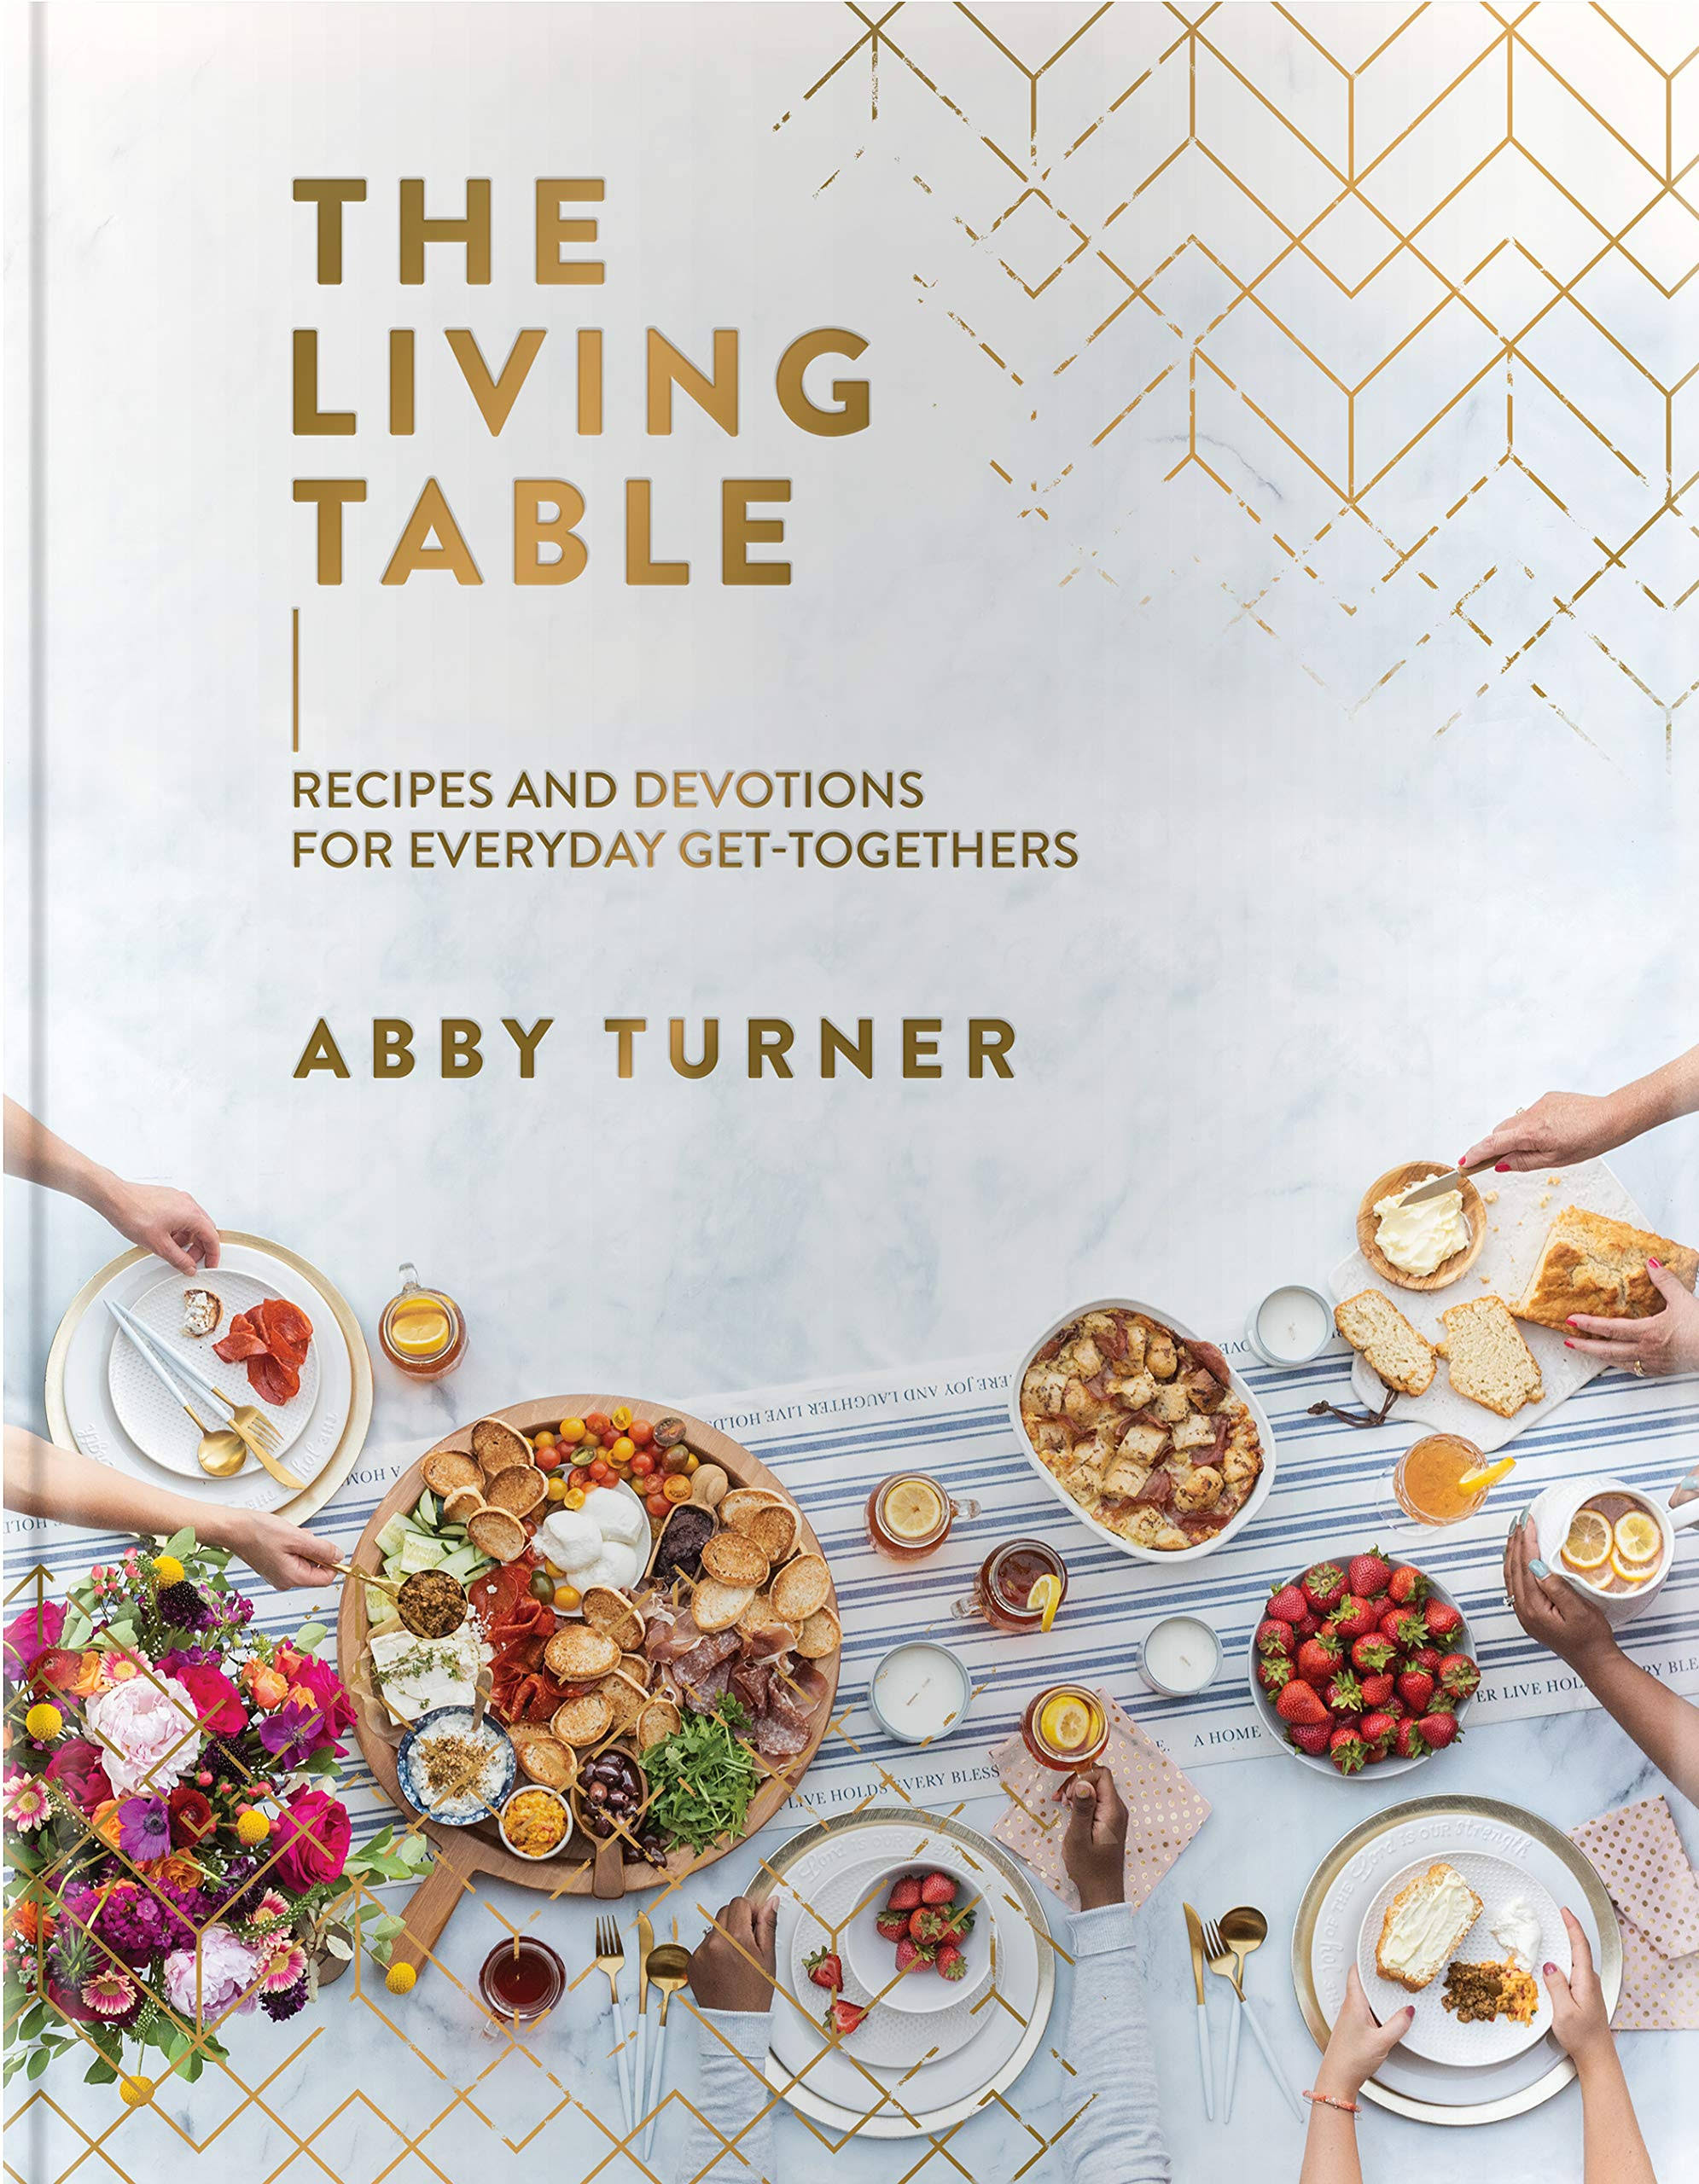 The Living Table by Abby Turner